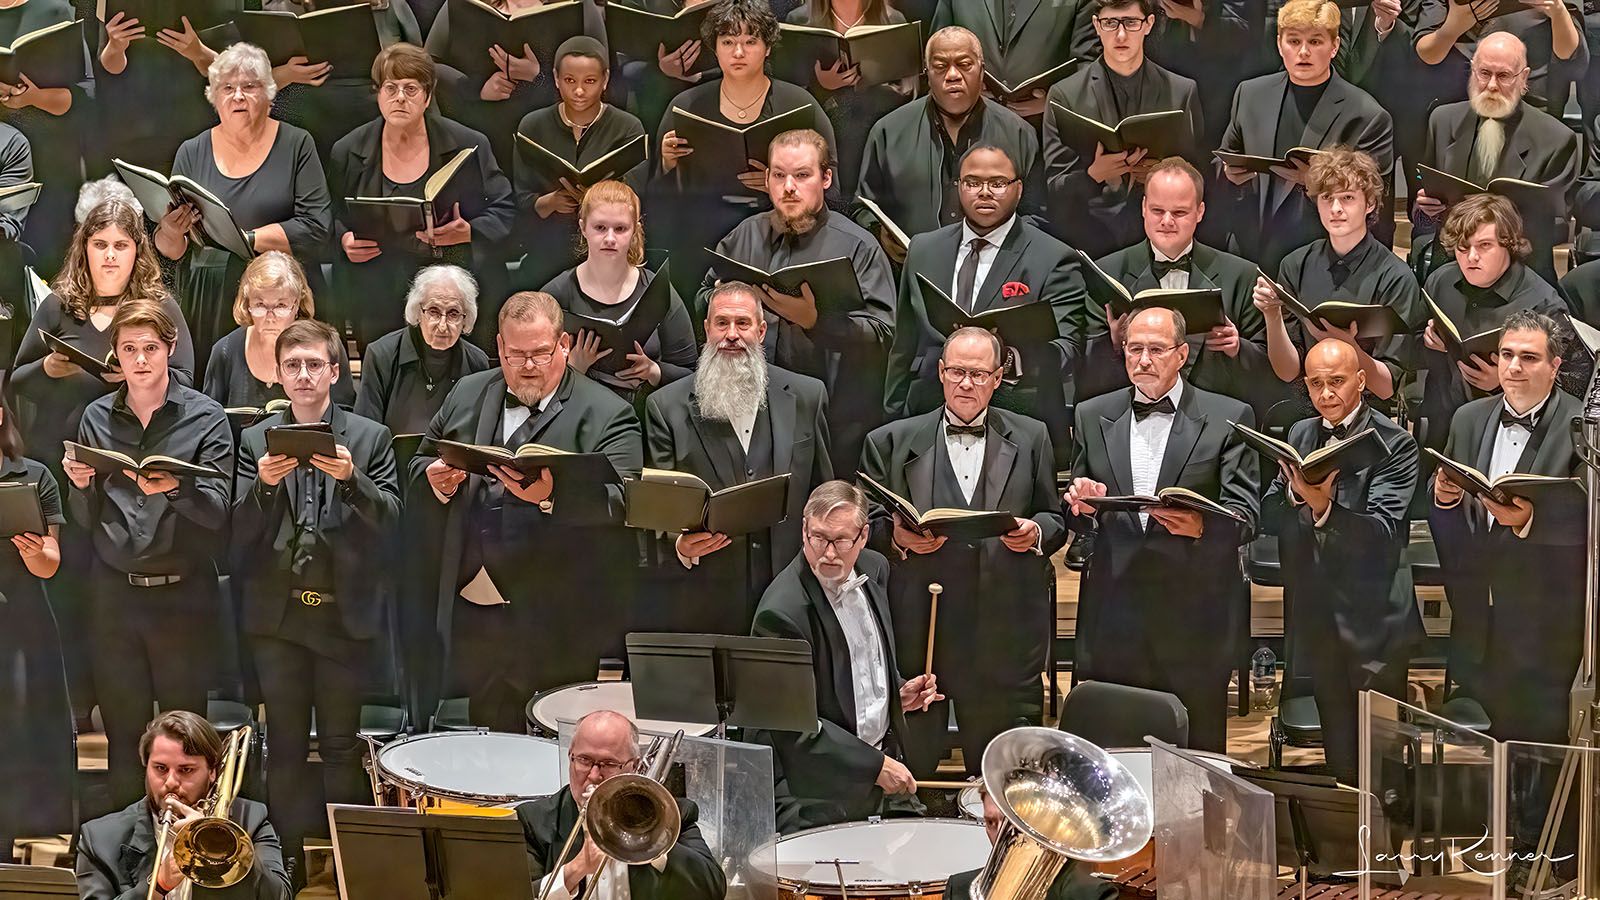 The Fort Wayne Philharmonic will be joined by 34 singers from the Fort Wayne Philharmonic Chorus and other local groups during performances of Holiday Pops at Purdue University Fort Wayne’s Auer Performance Hall.